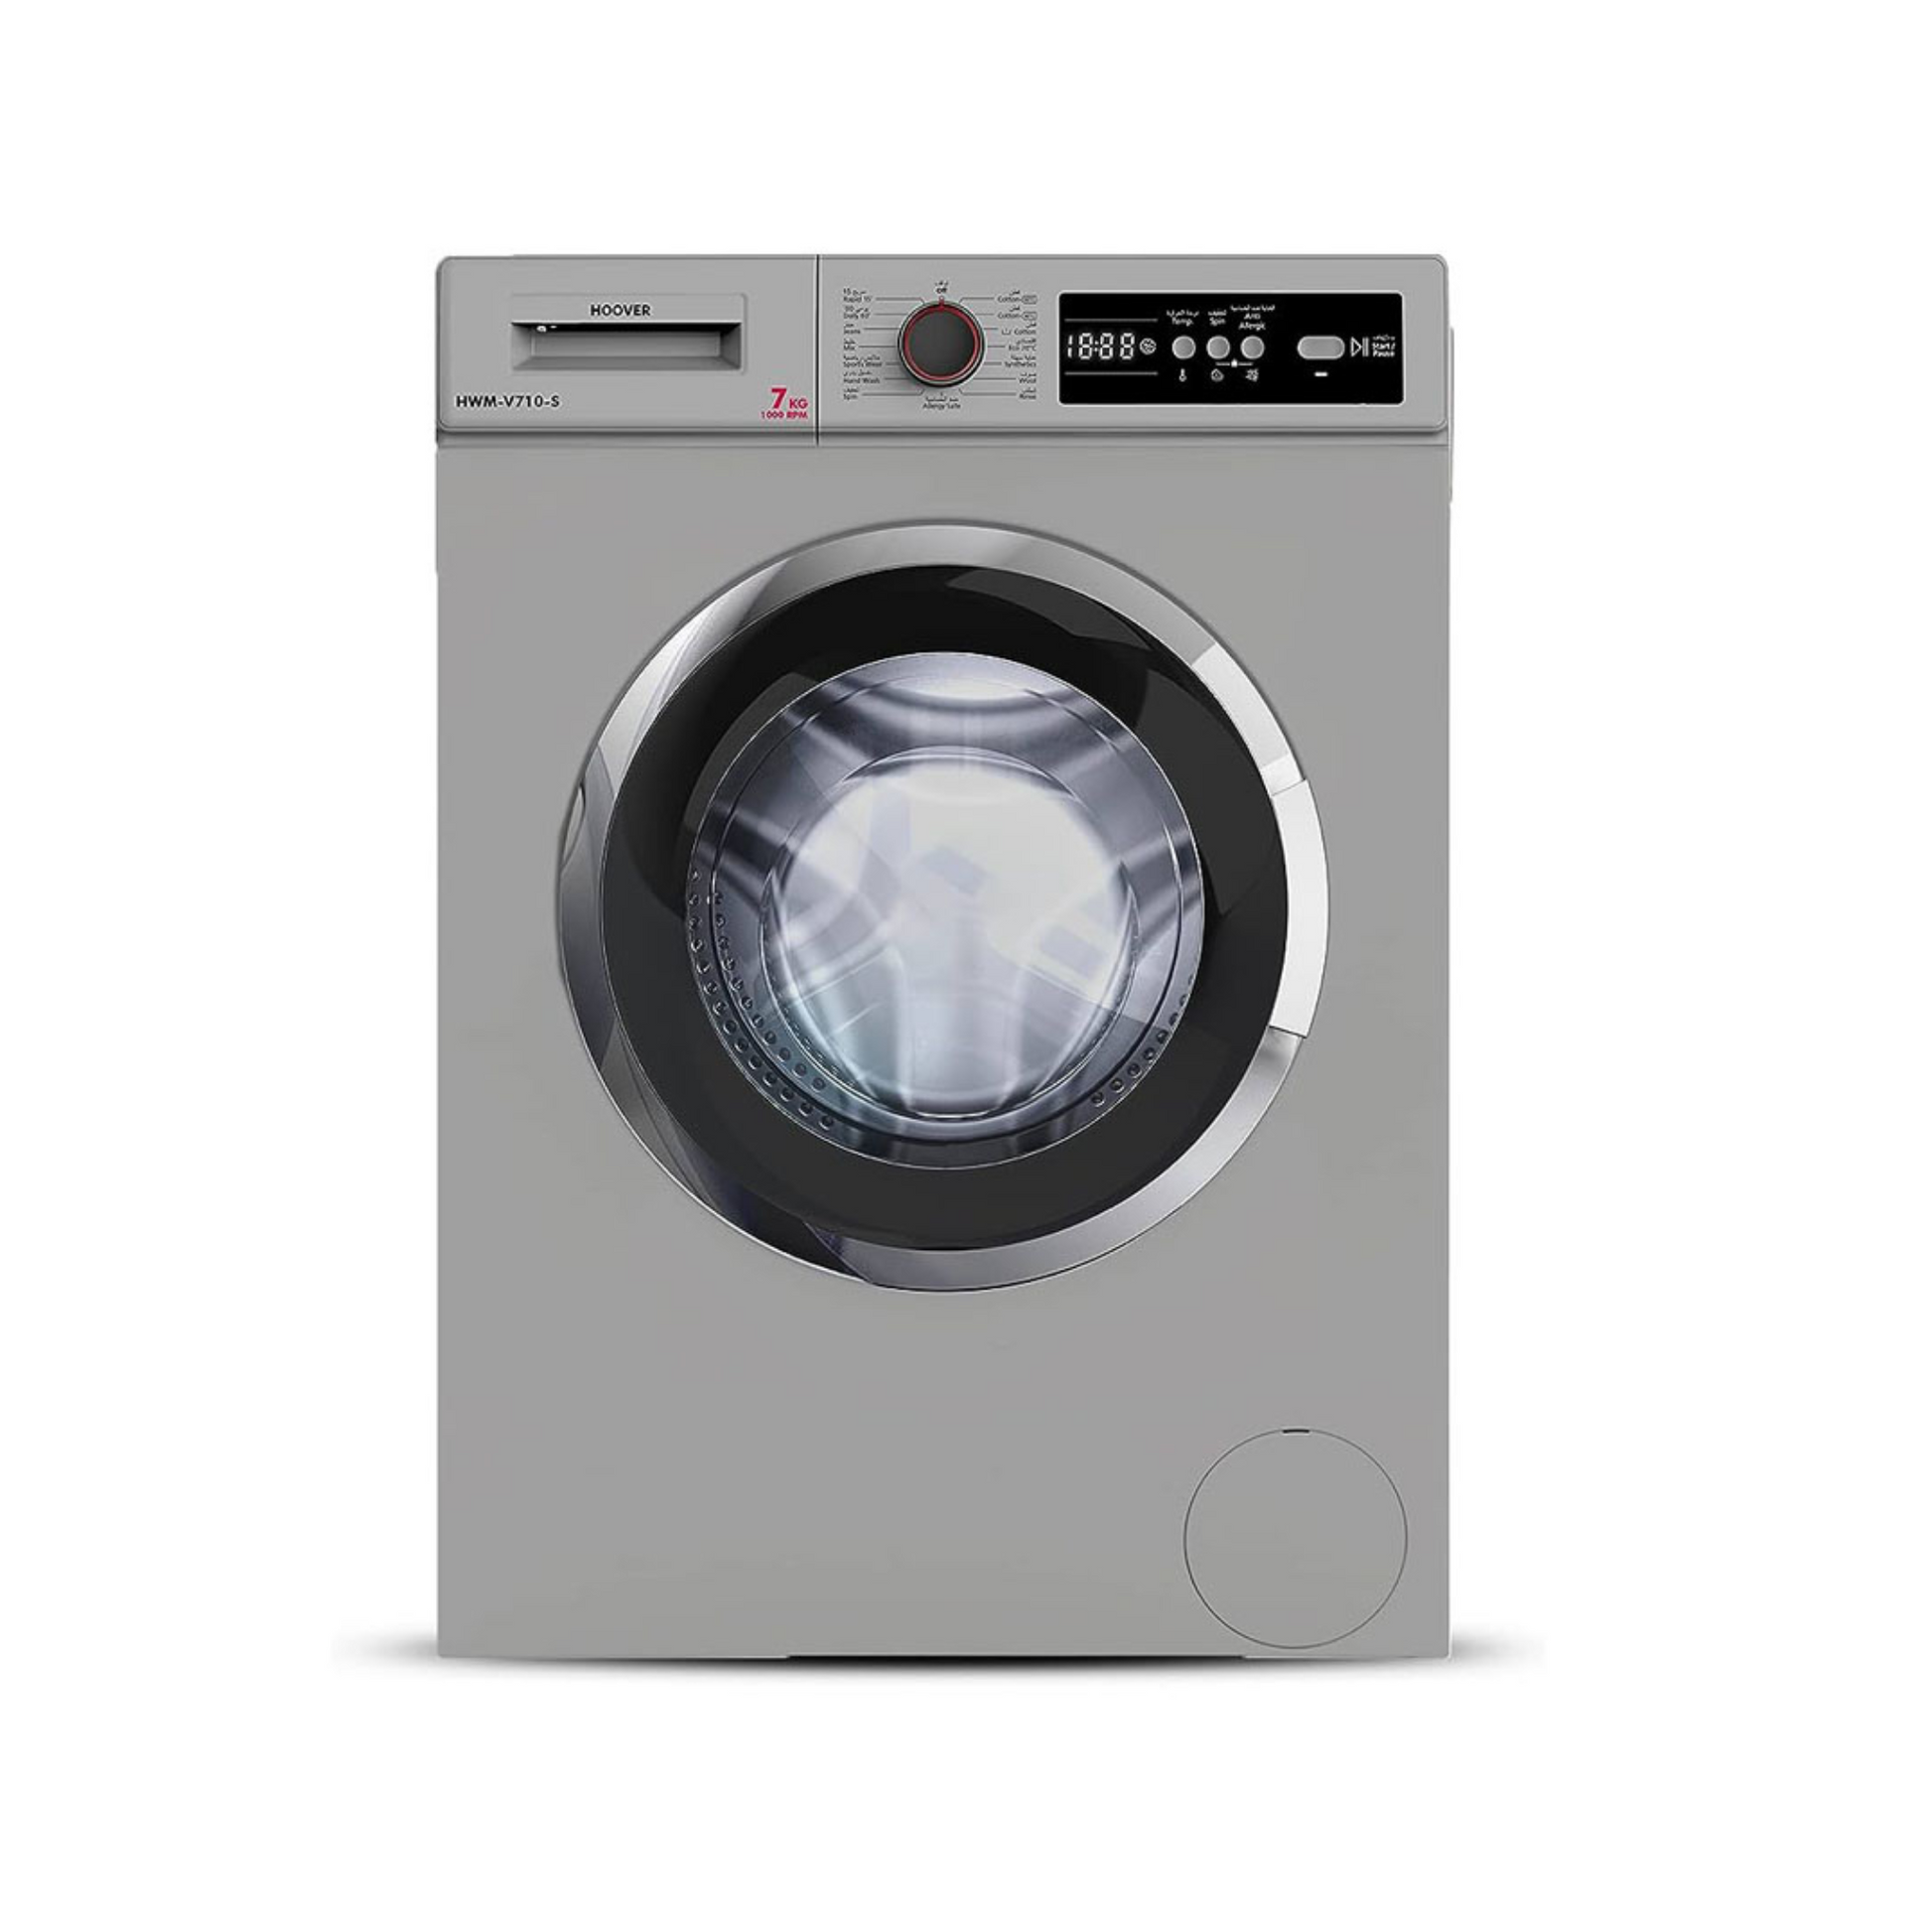 Hoover 7KG Fully Automatic Washing Machine, HWMV710S